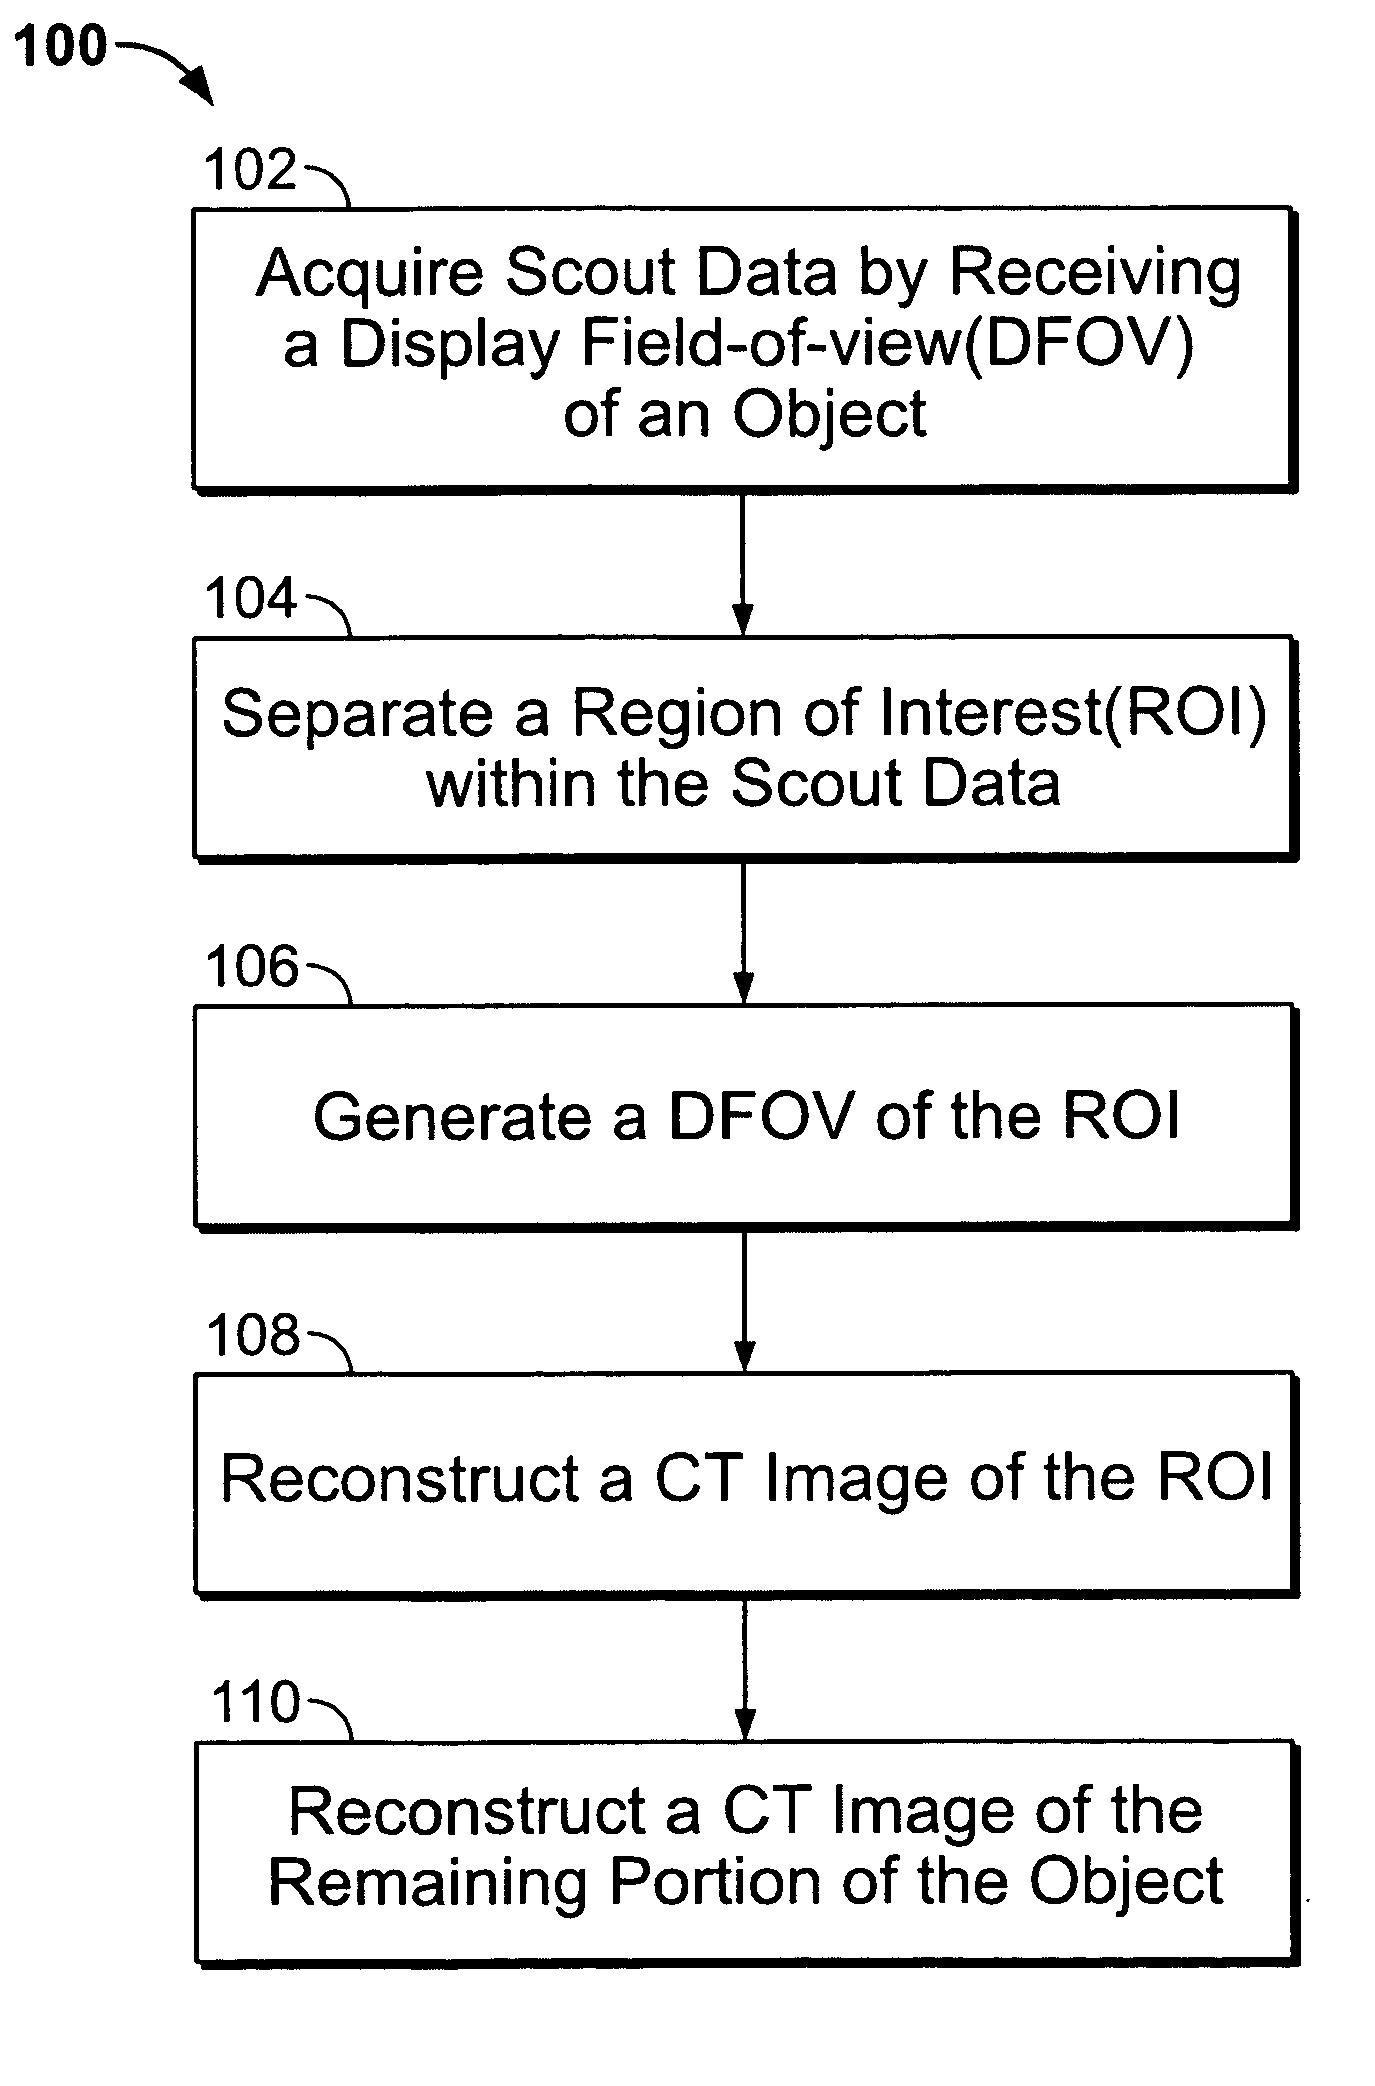 Systems and methods for improving a resolution of an image